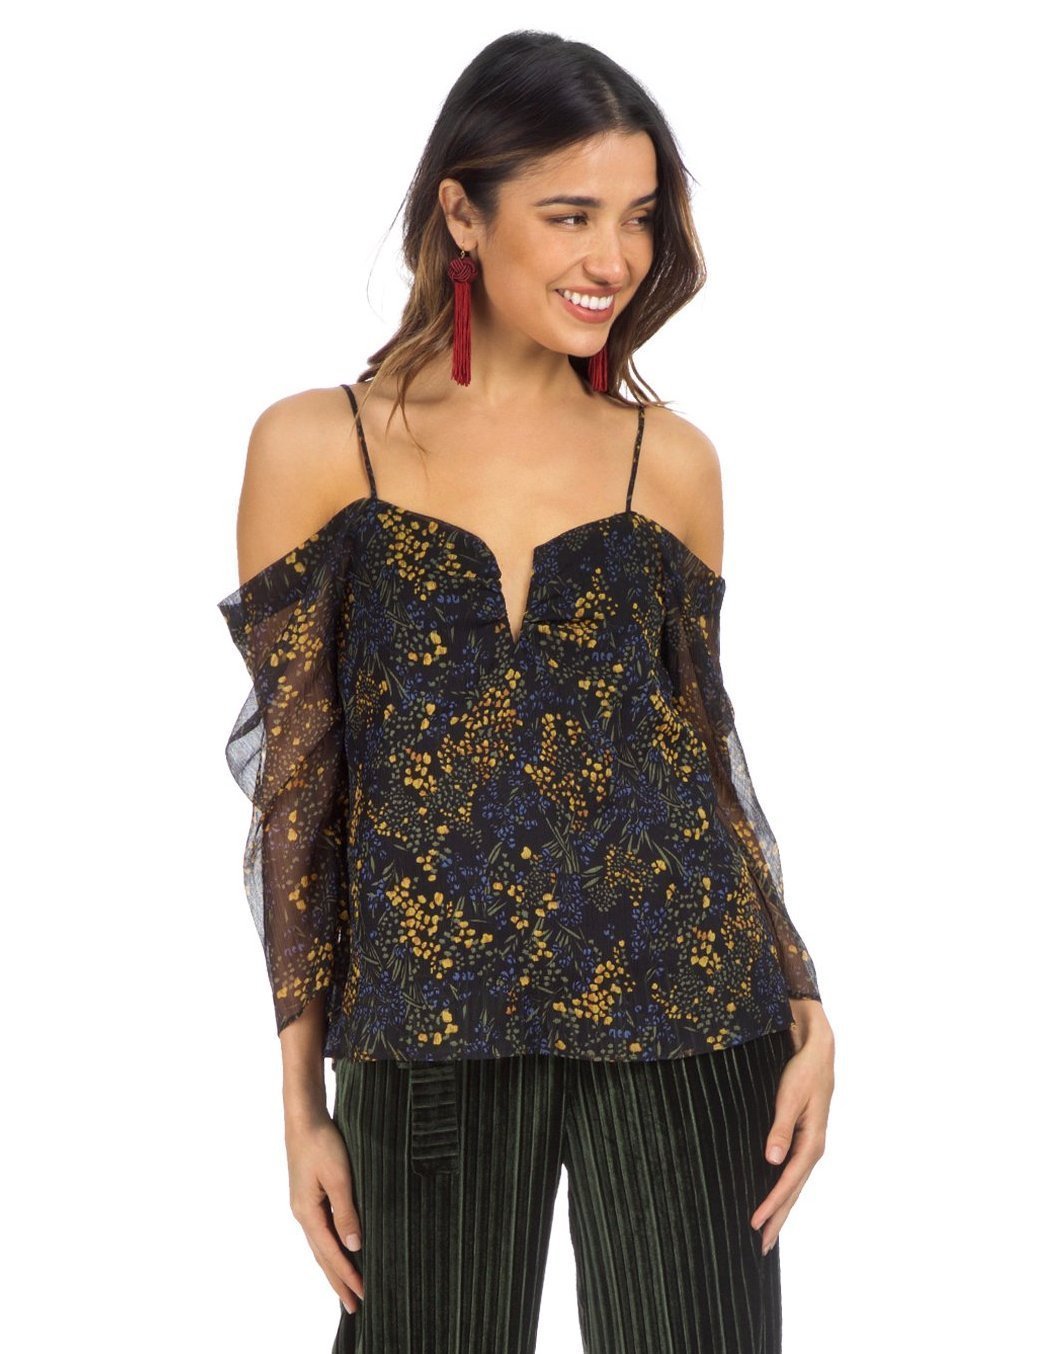 Woman wearing a top rental from Line & Dot called Garlan Cold Shoulder Top